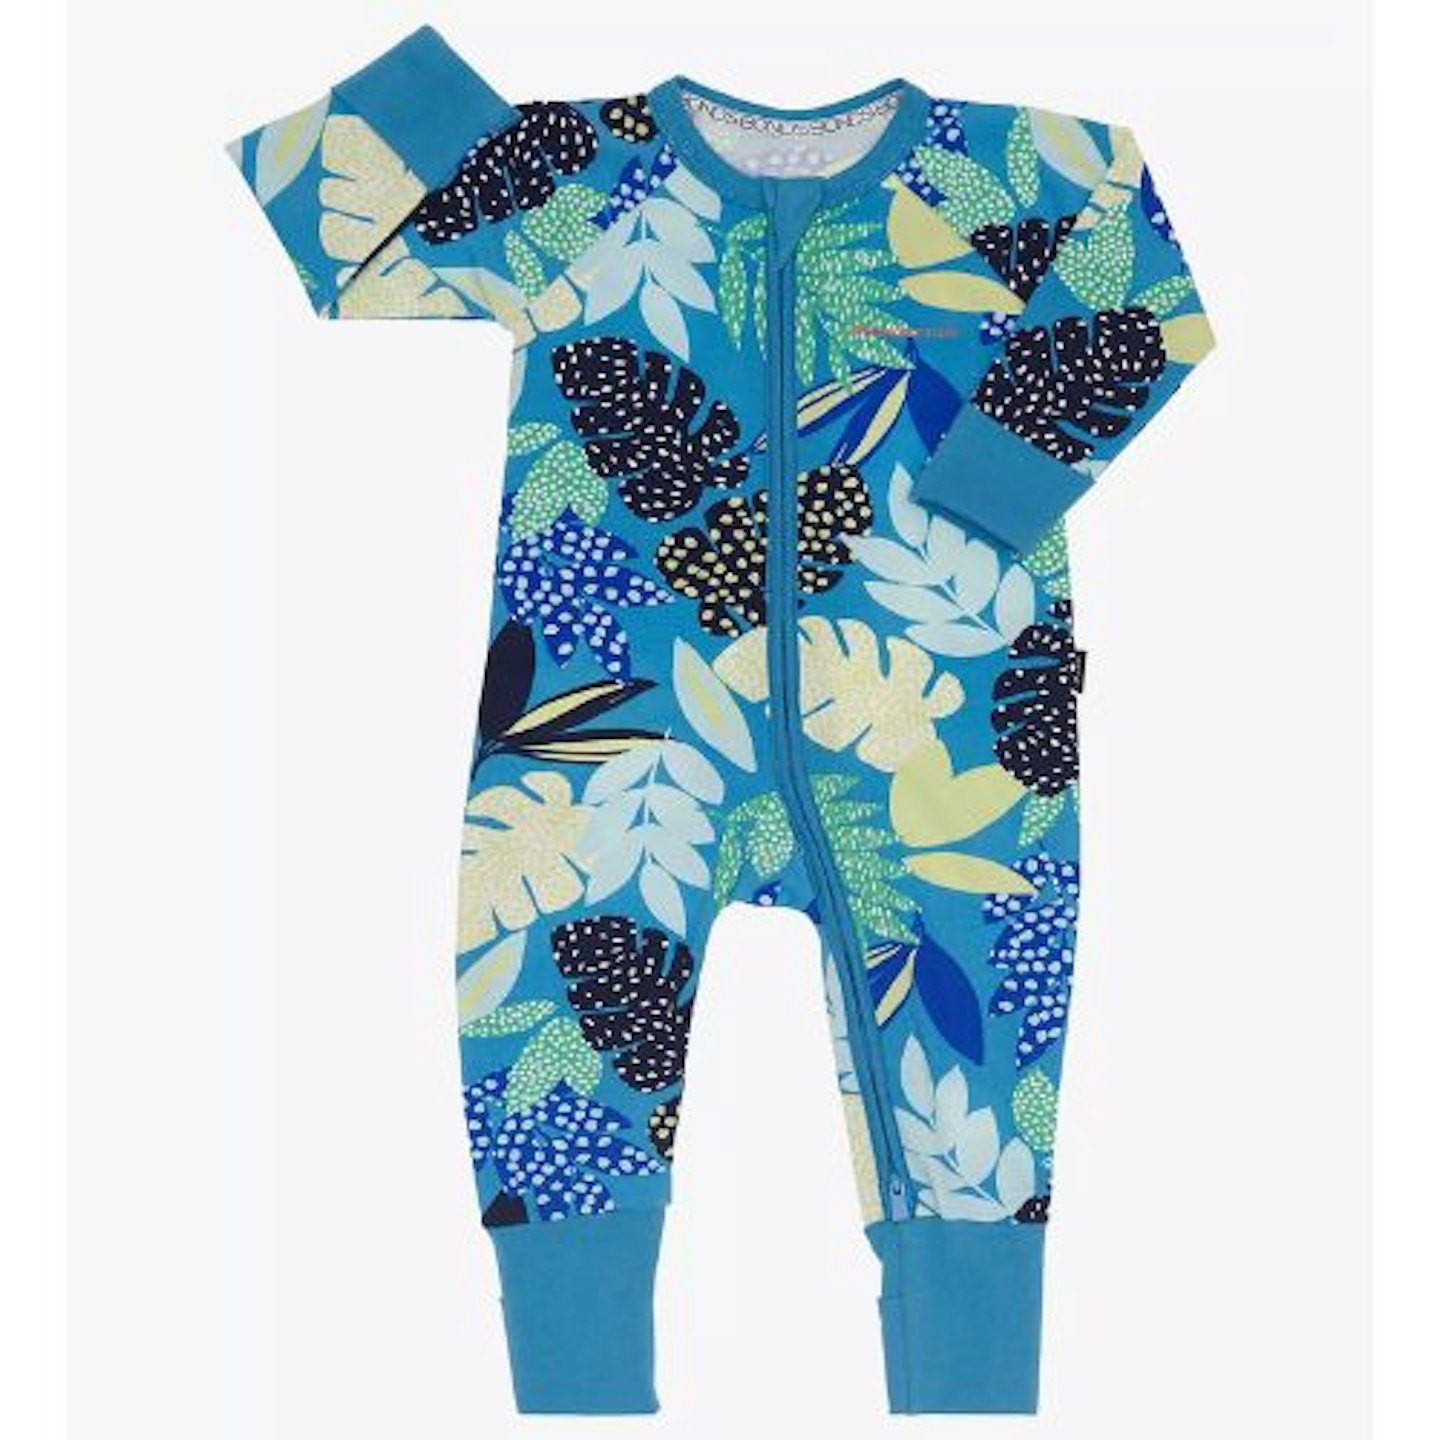 Cute And Comfy Baby Sleepwear And Sleepsuits | Reviews | Mother & Baby